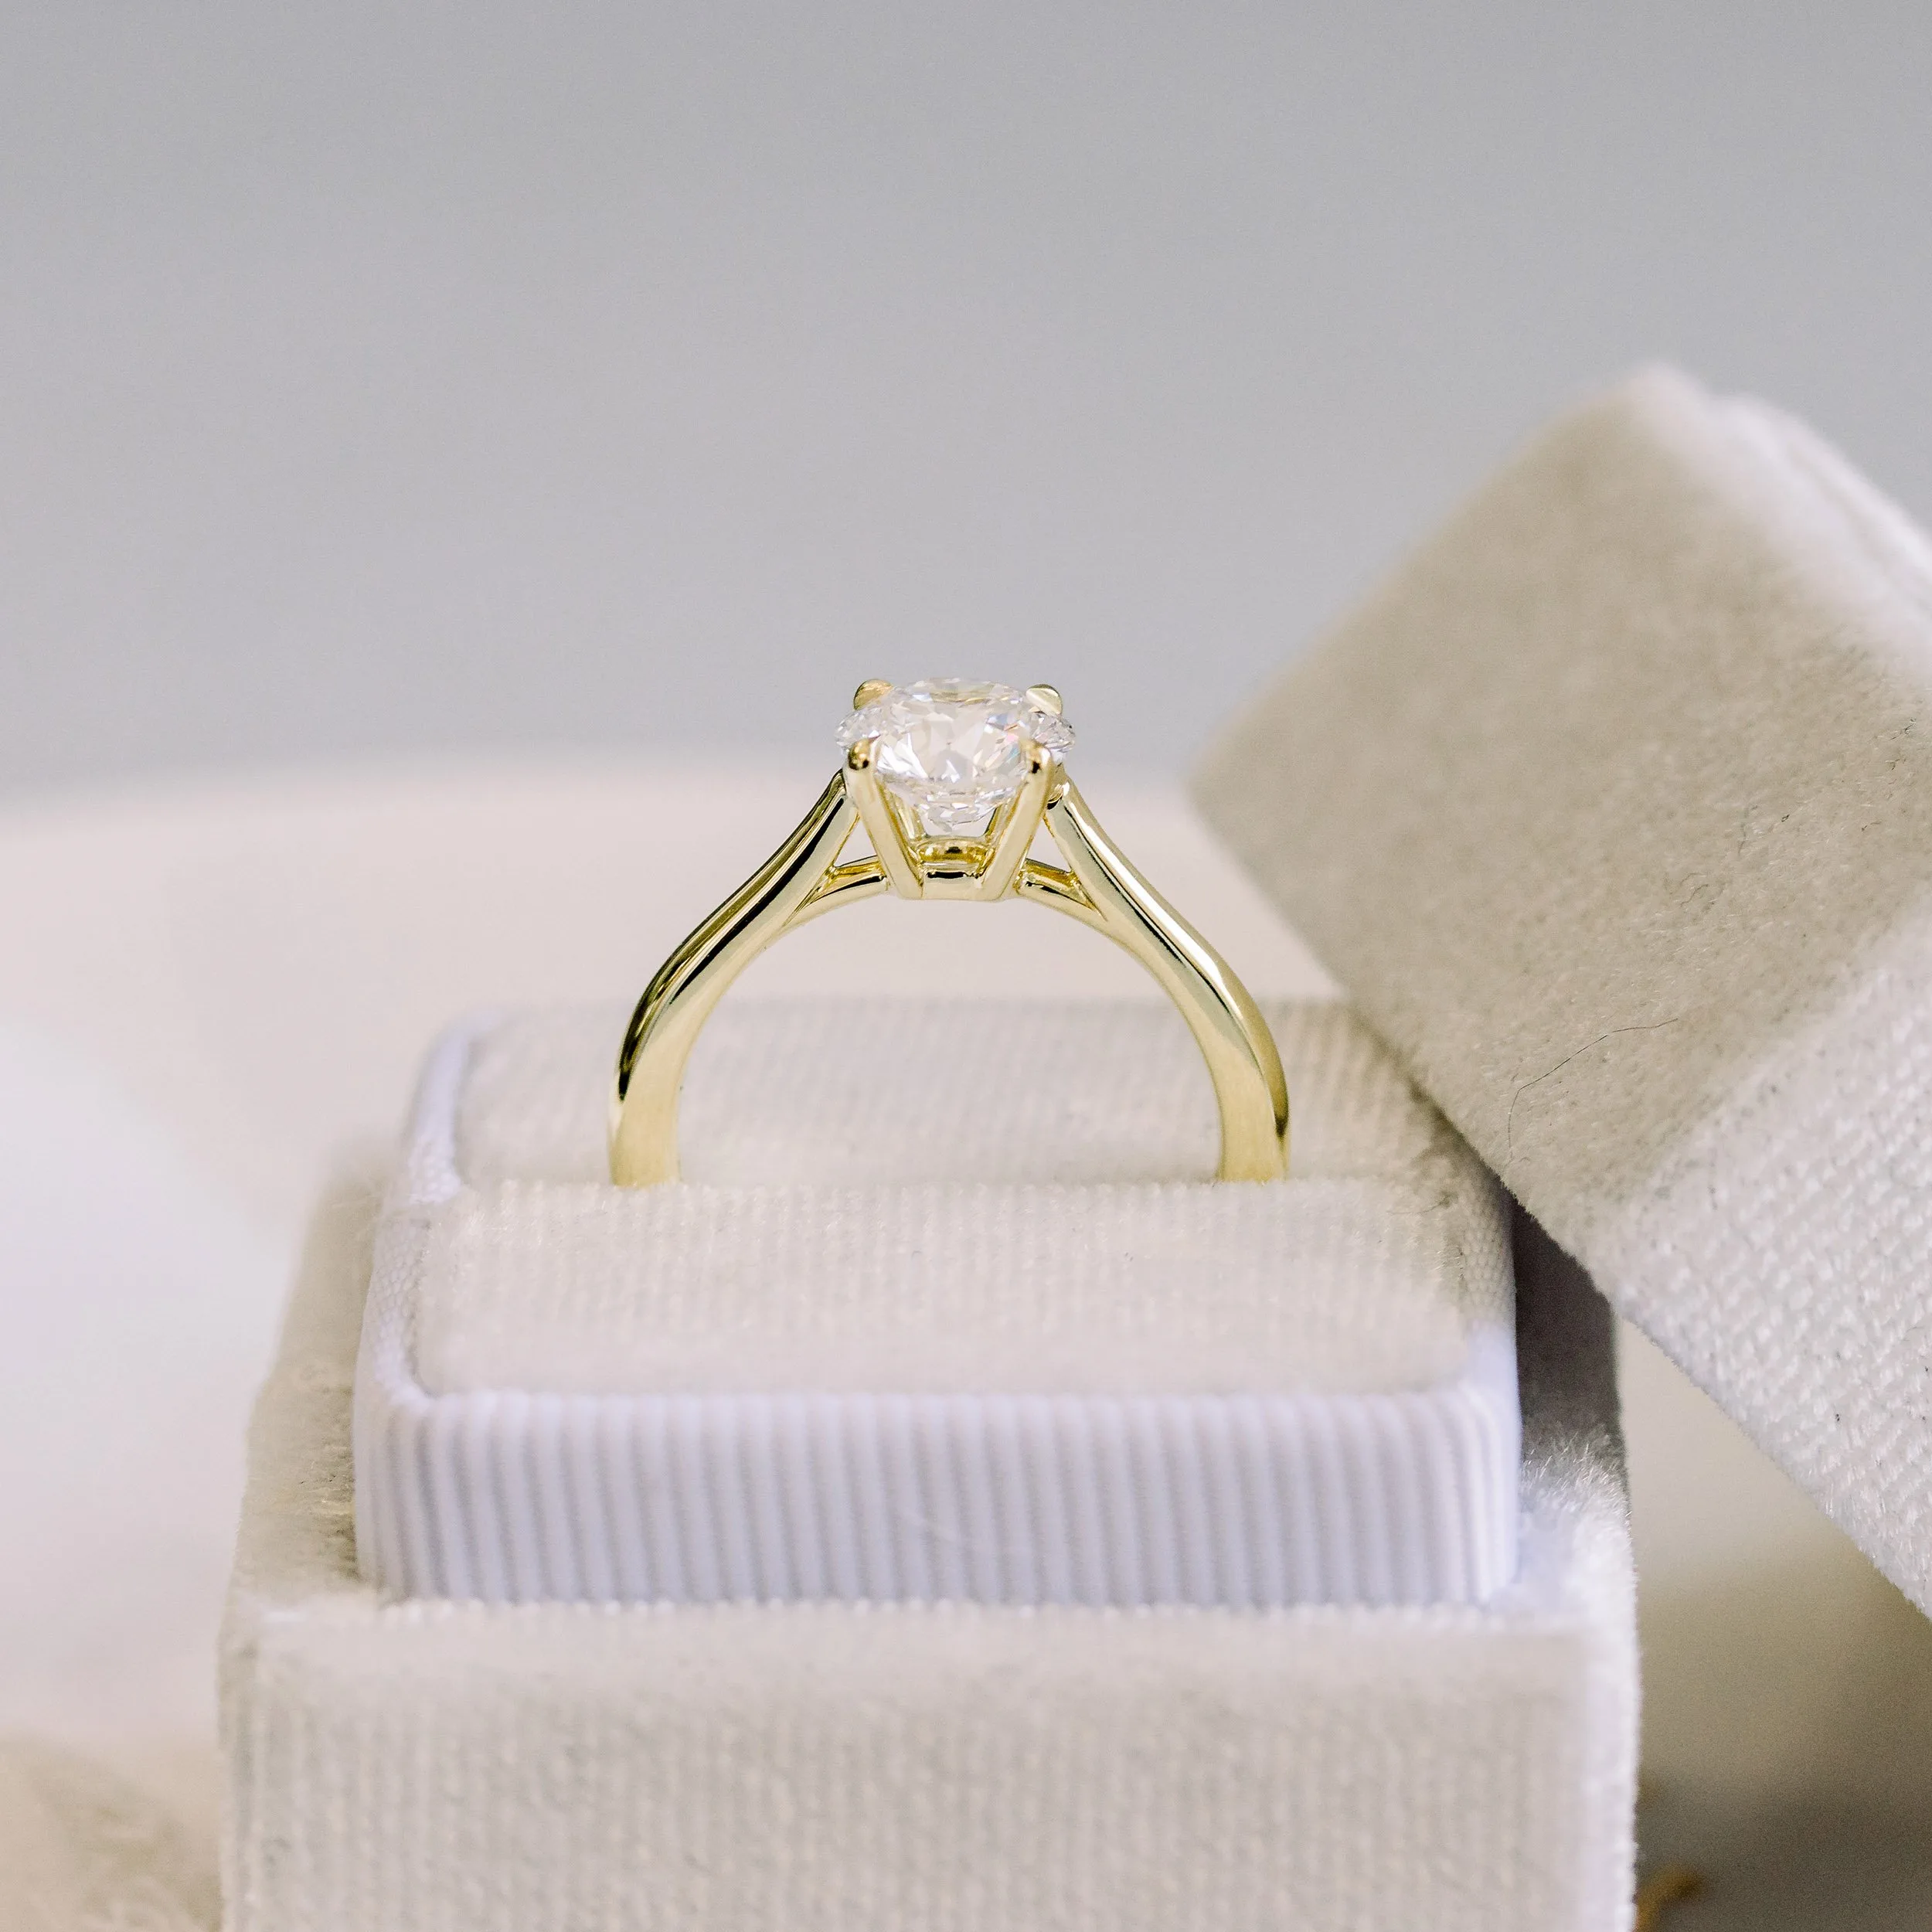 Hand Selected 1.25 Carat Man Made Diamonds set in 18kt Yellow Gold Open Tapered Cathedral Solitaire Diamond Engagement Ring (Profile View)